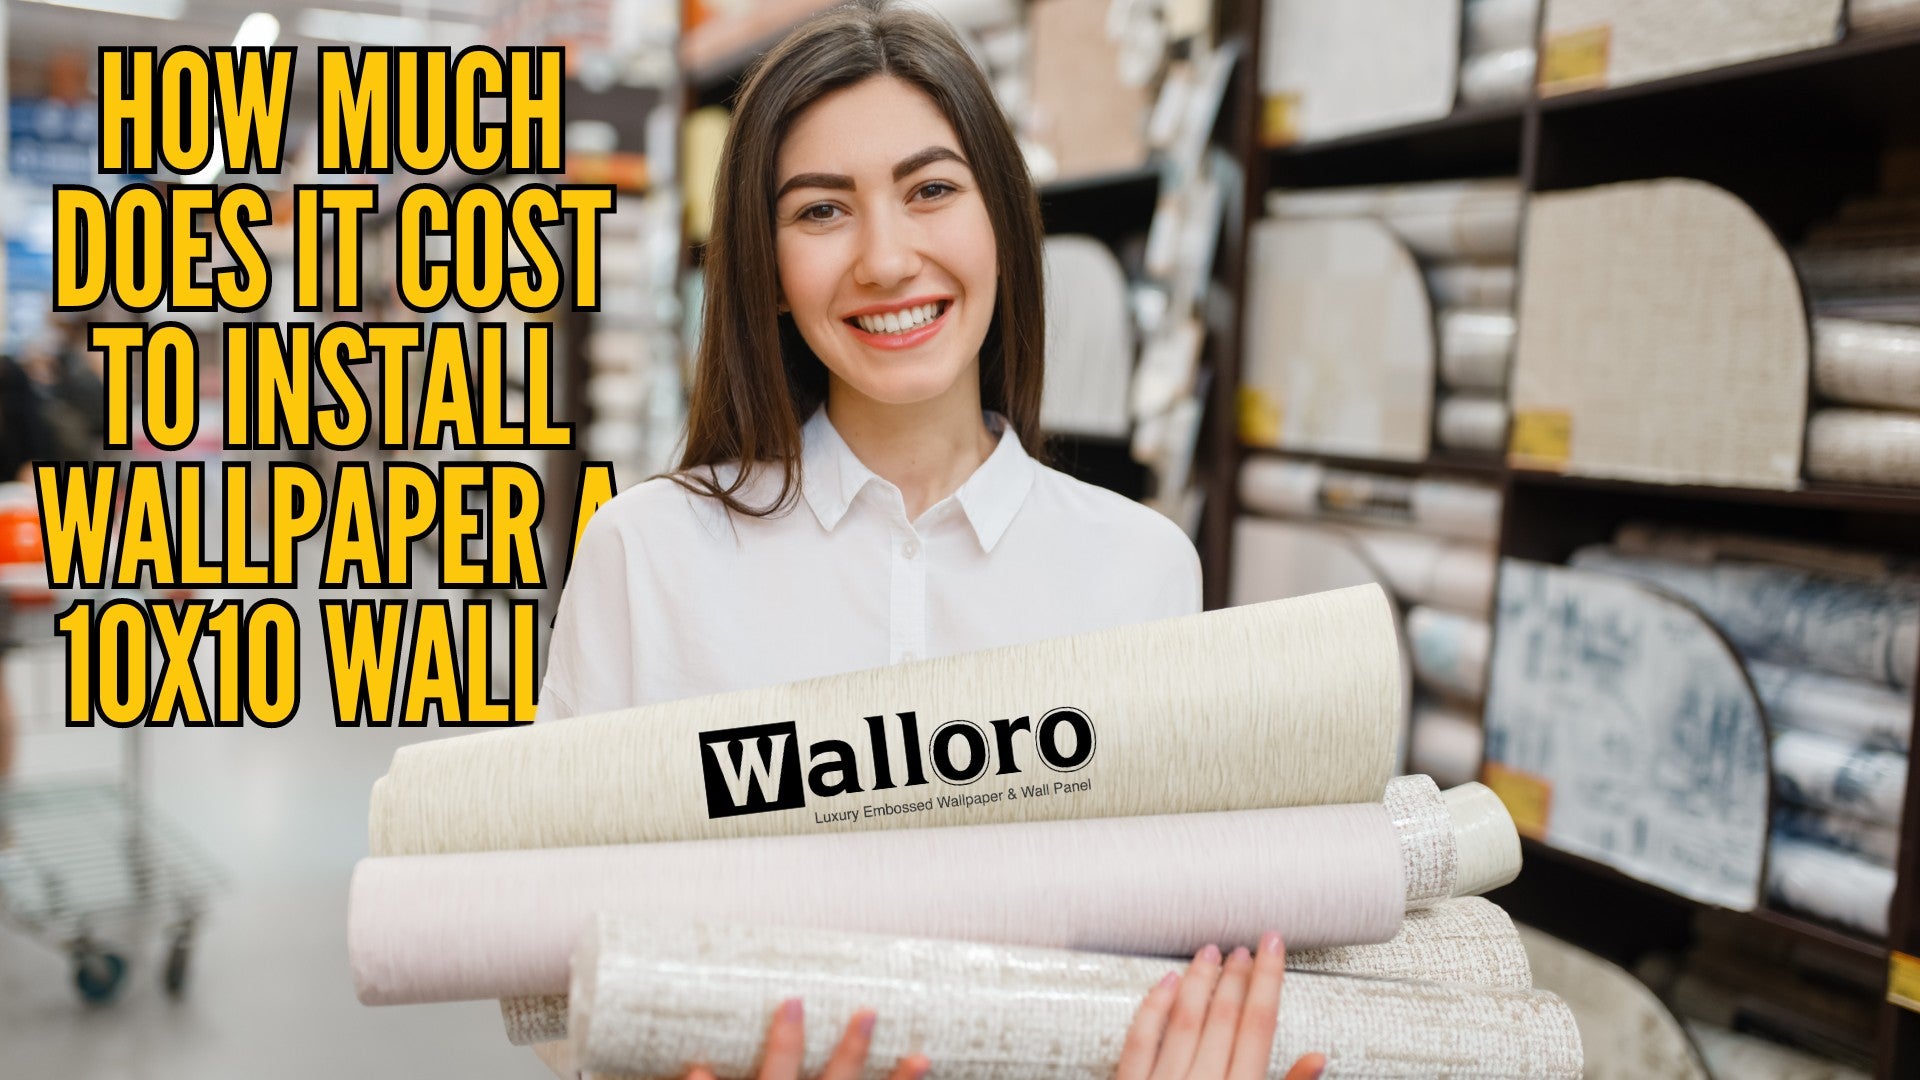 How much does it cost to install wallpaper a 10x10 wall?